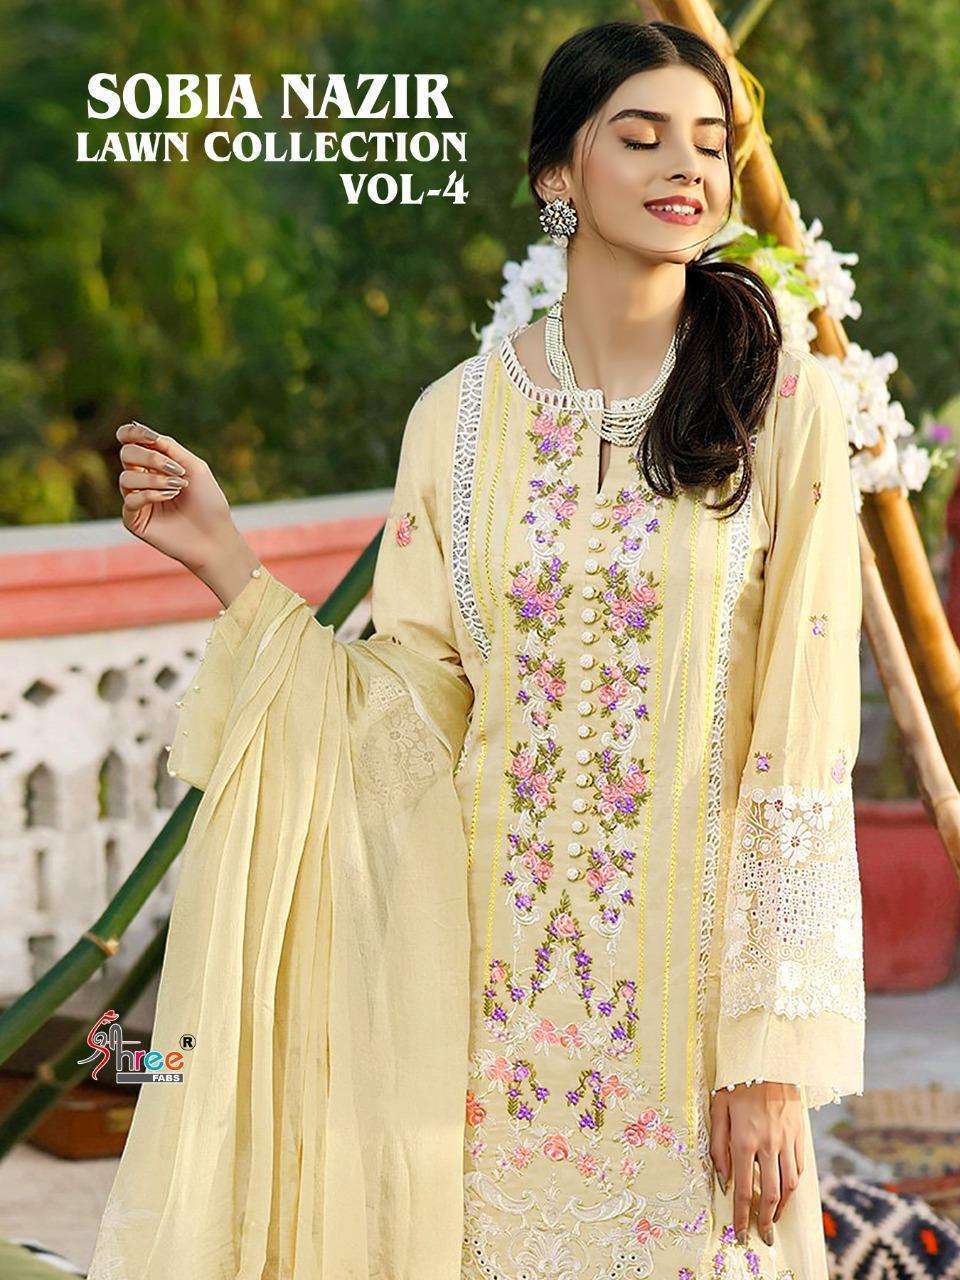 Shree Fabs Sobia Nazir Lawn Vol 4 Lawn Cotton With Heavy Emb...